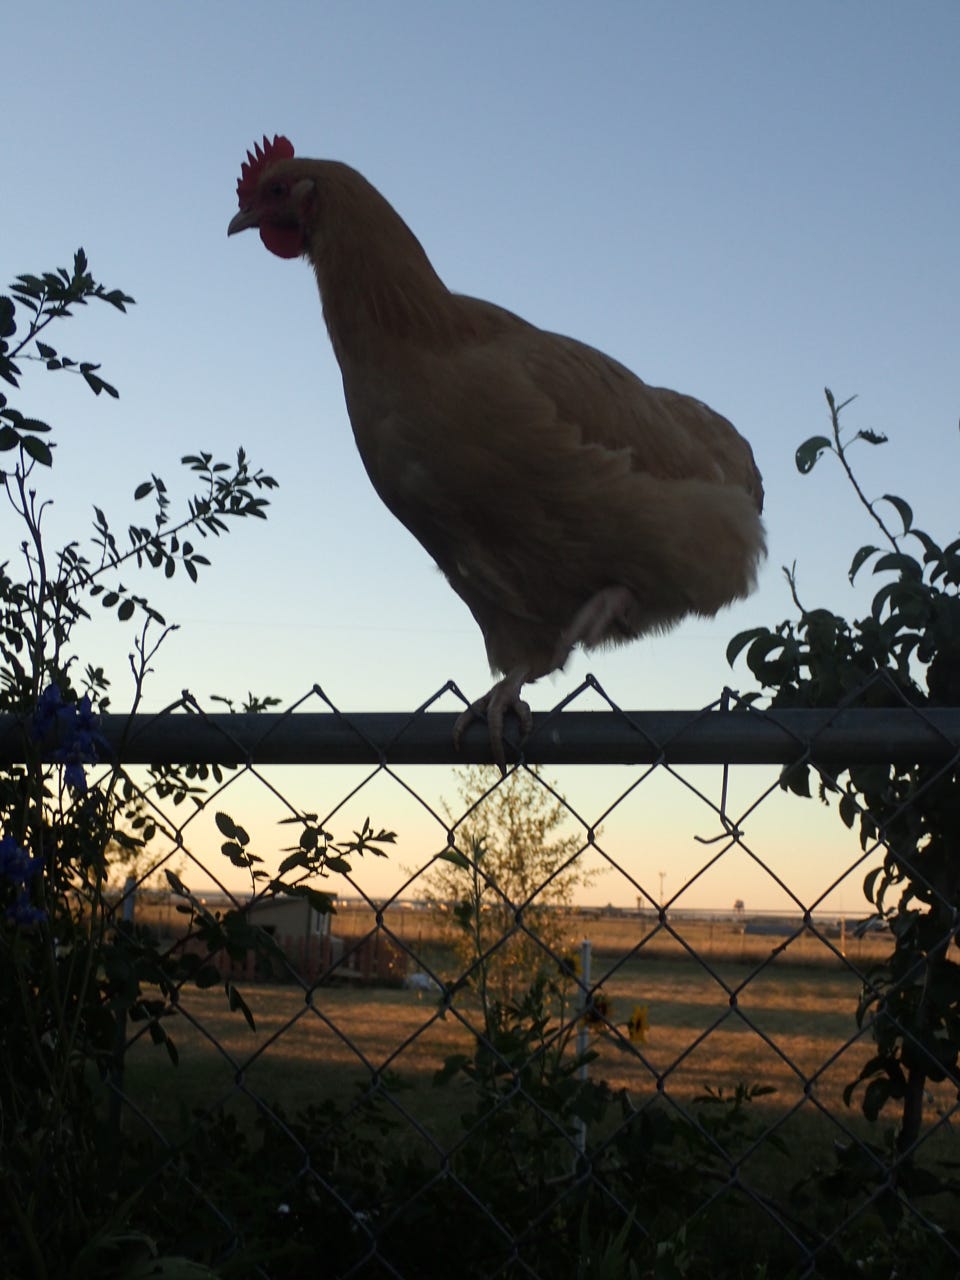 chickens--spider-eating-weeds-2